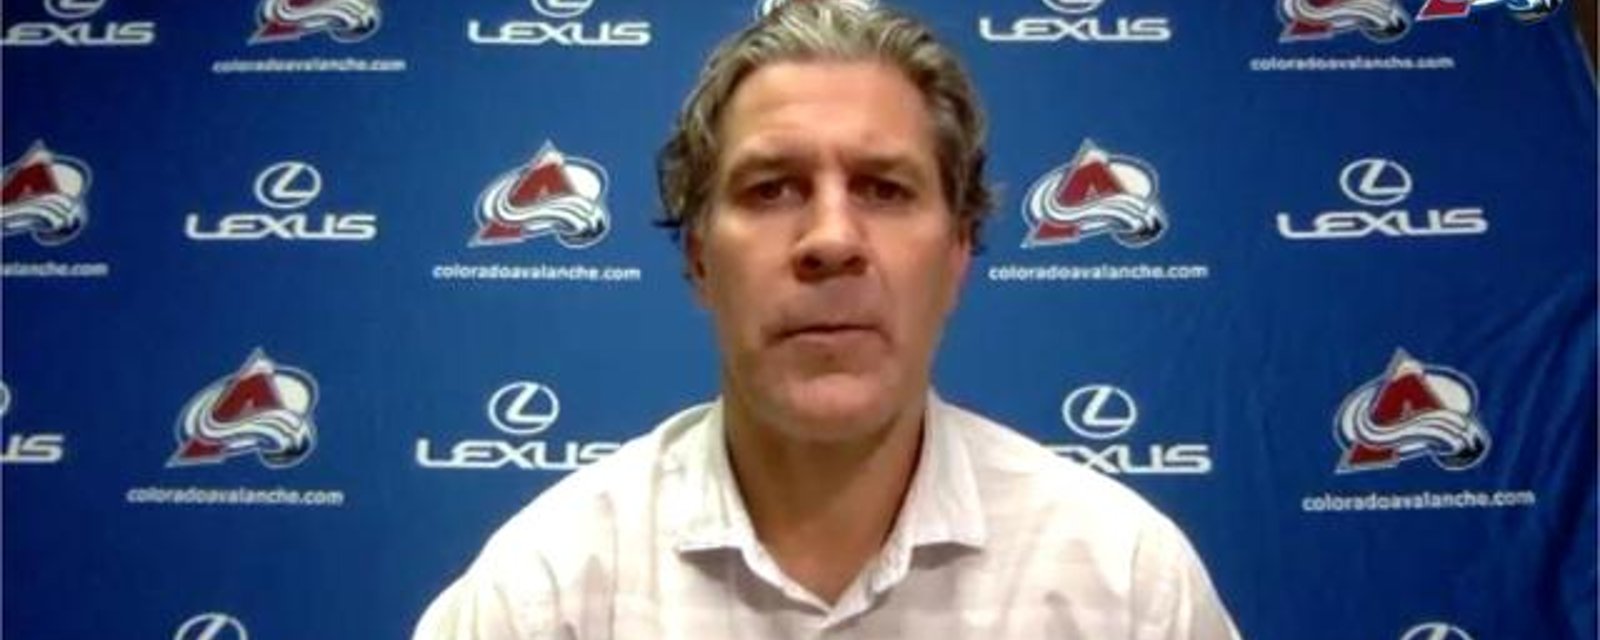 Fans struggle with rumour that coach Bednar’s job is in jeopardy if Avs lose to Vegas